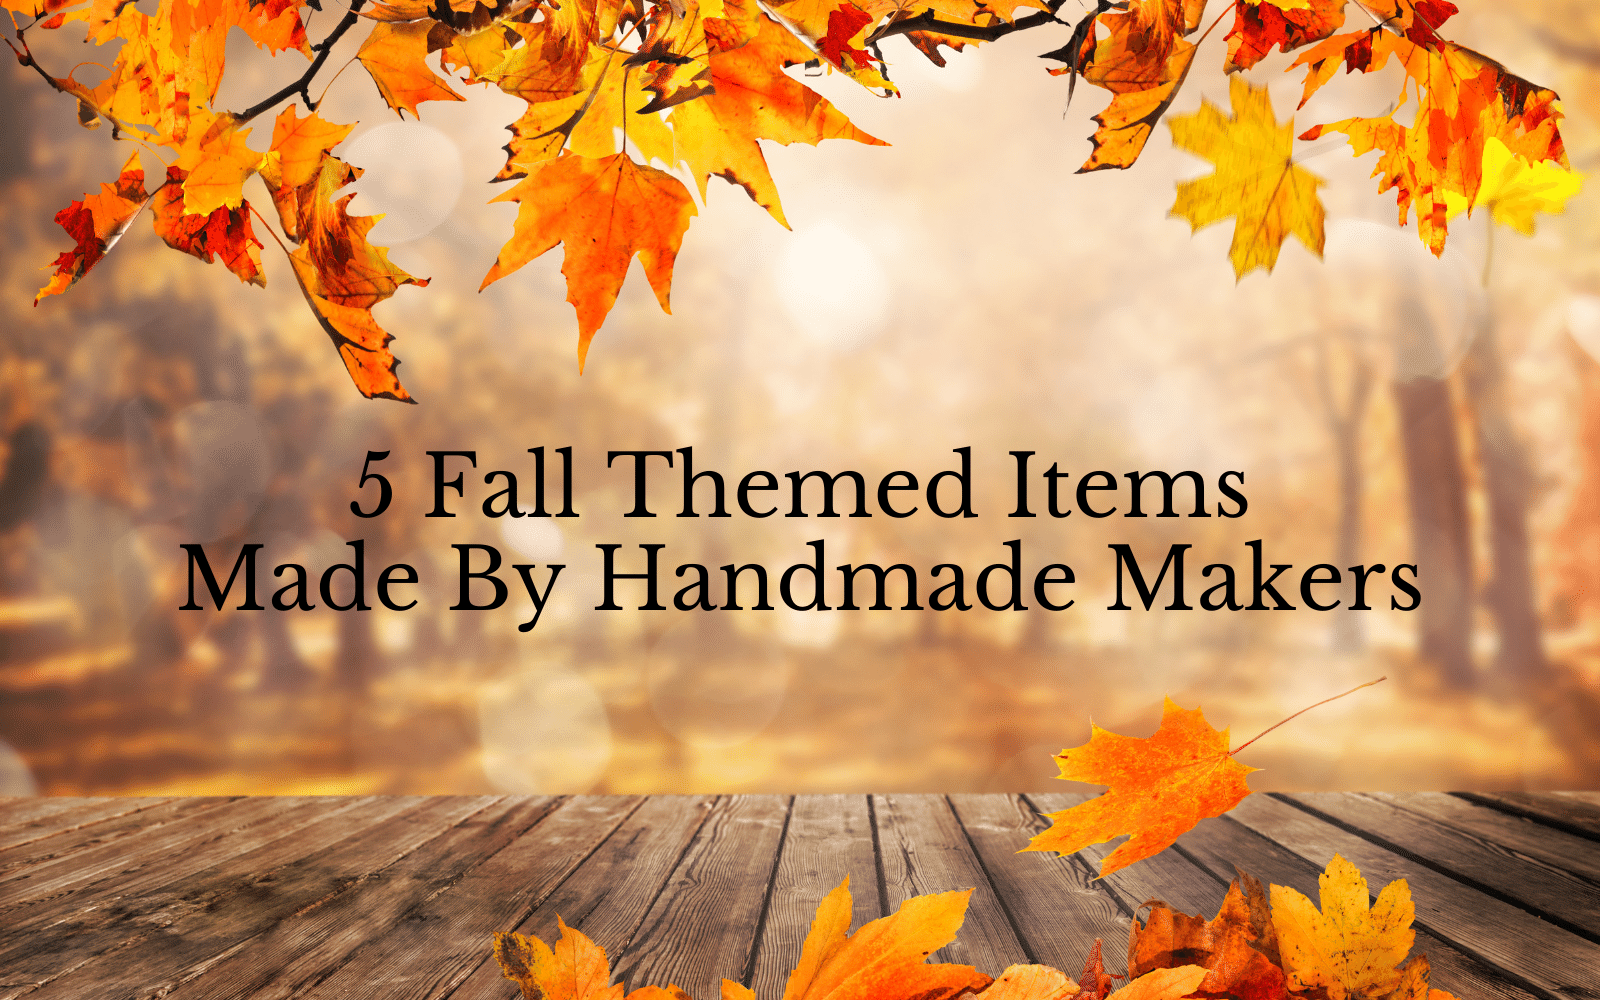 5 Fall Themed Items Made By Handmade Makers | Sew Happy Quilting | Maple Leaf Home Decor